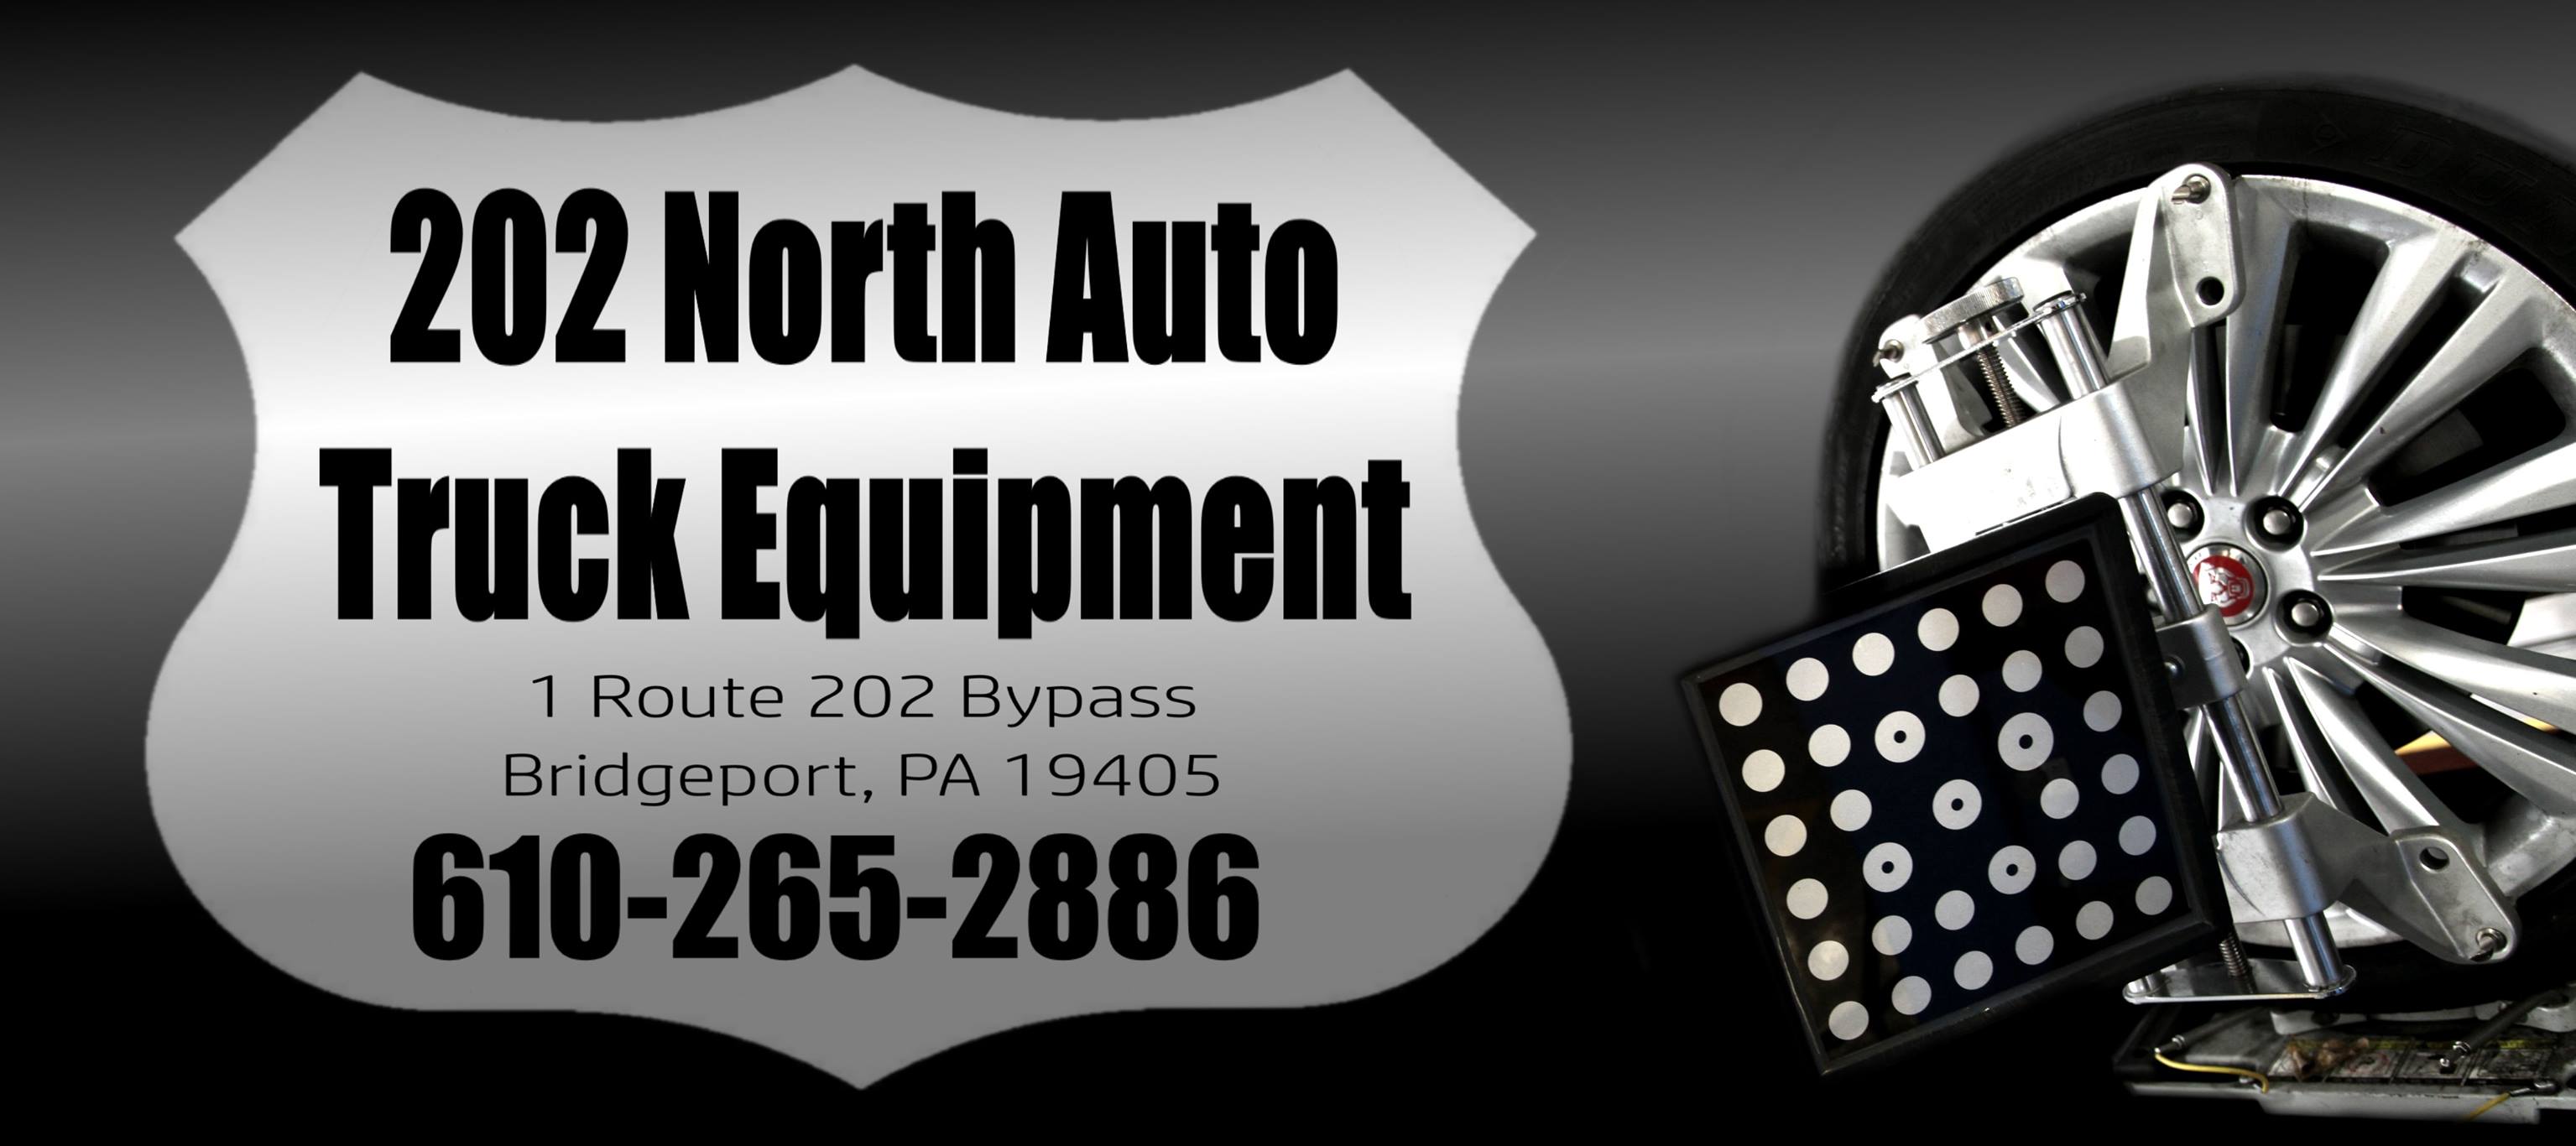 202 North Auto Truck and Equipment